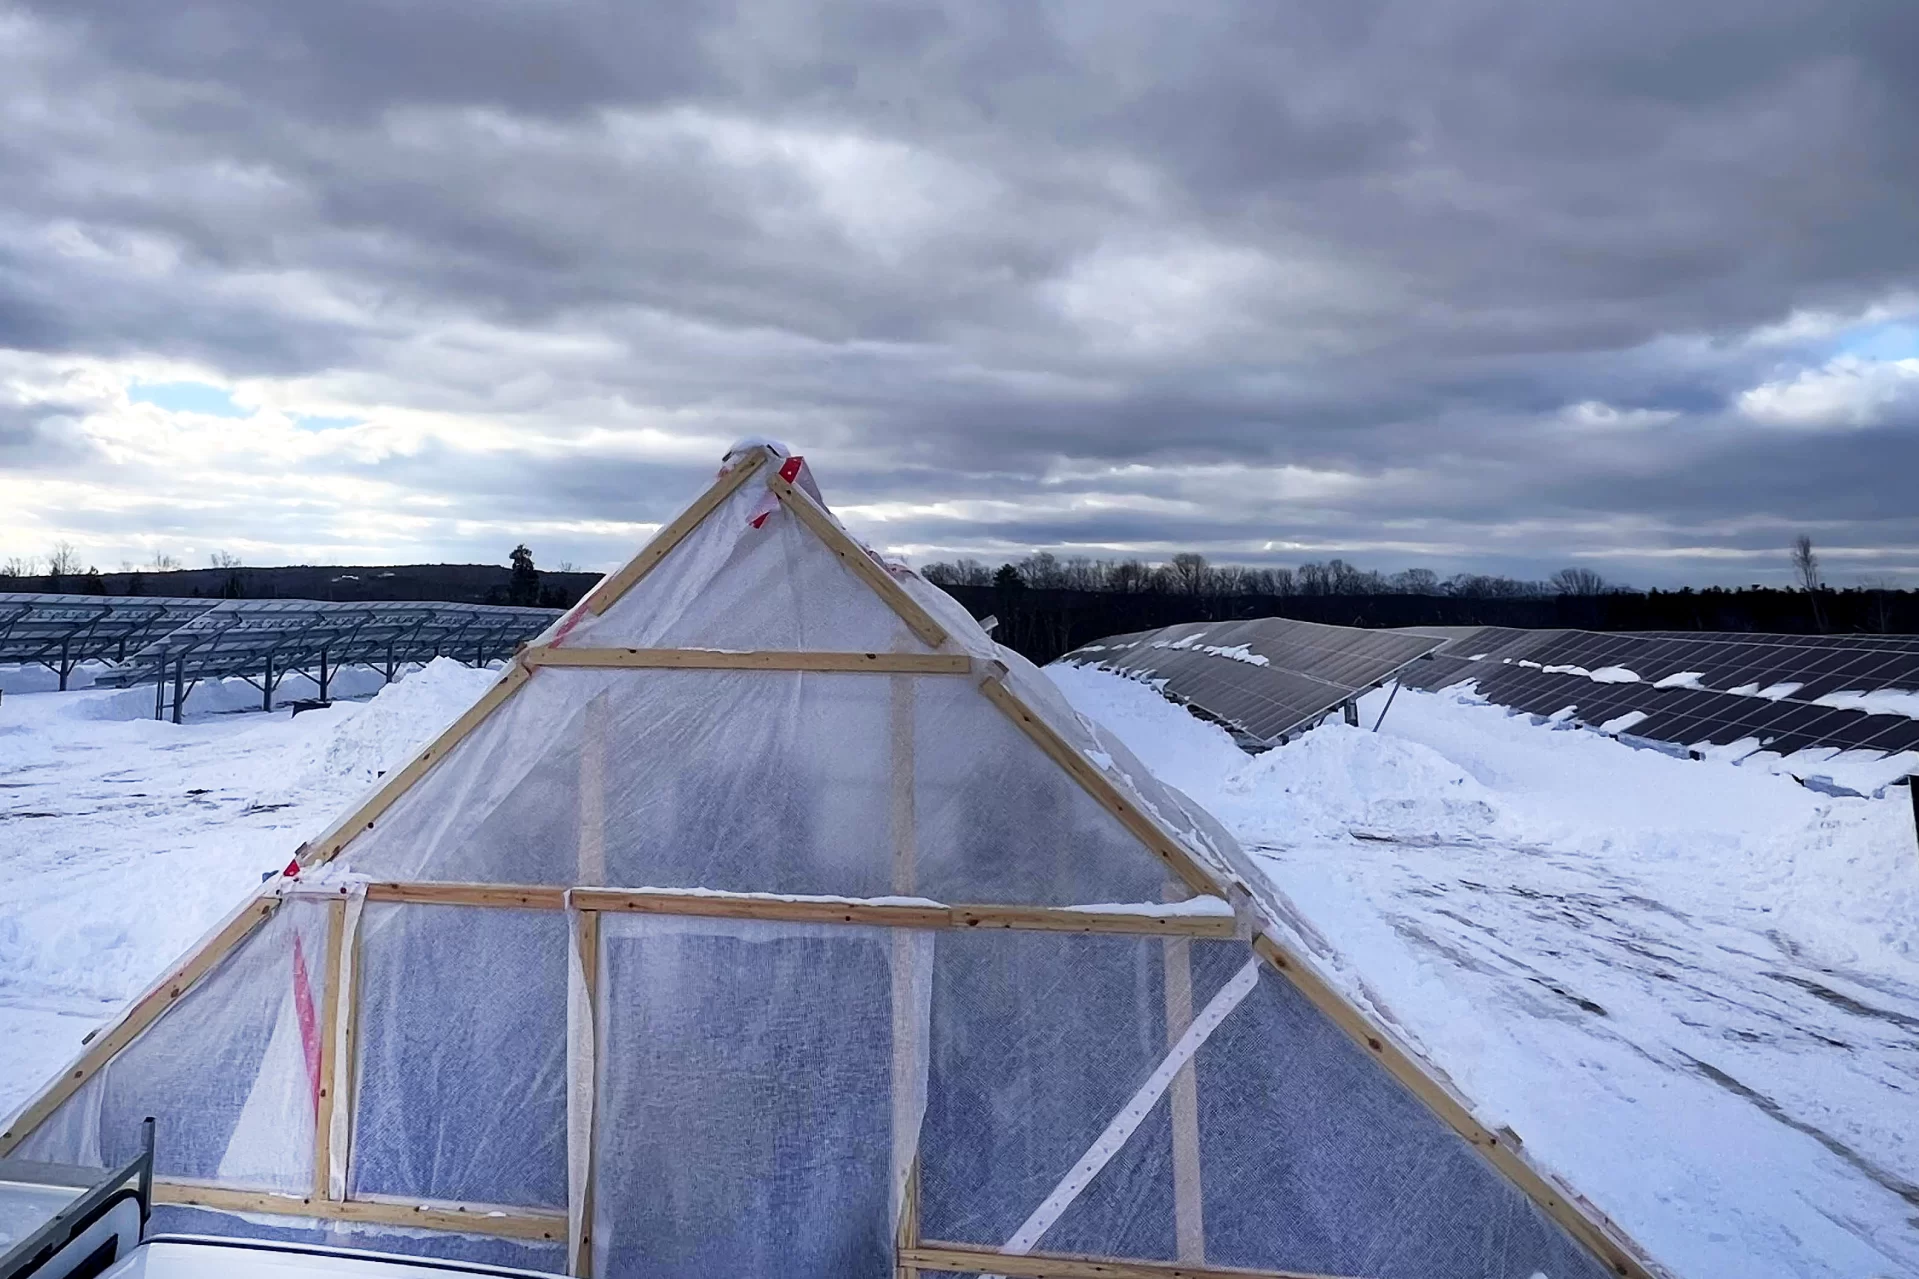 ReVision Energy uses temporary huts like this to protect equipment and supplies from the elements. (ReVision Energy photo)